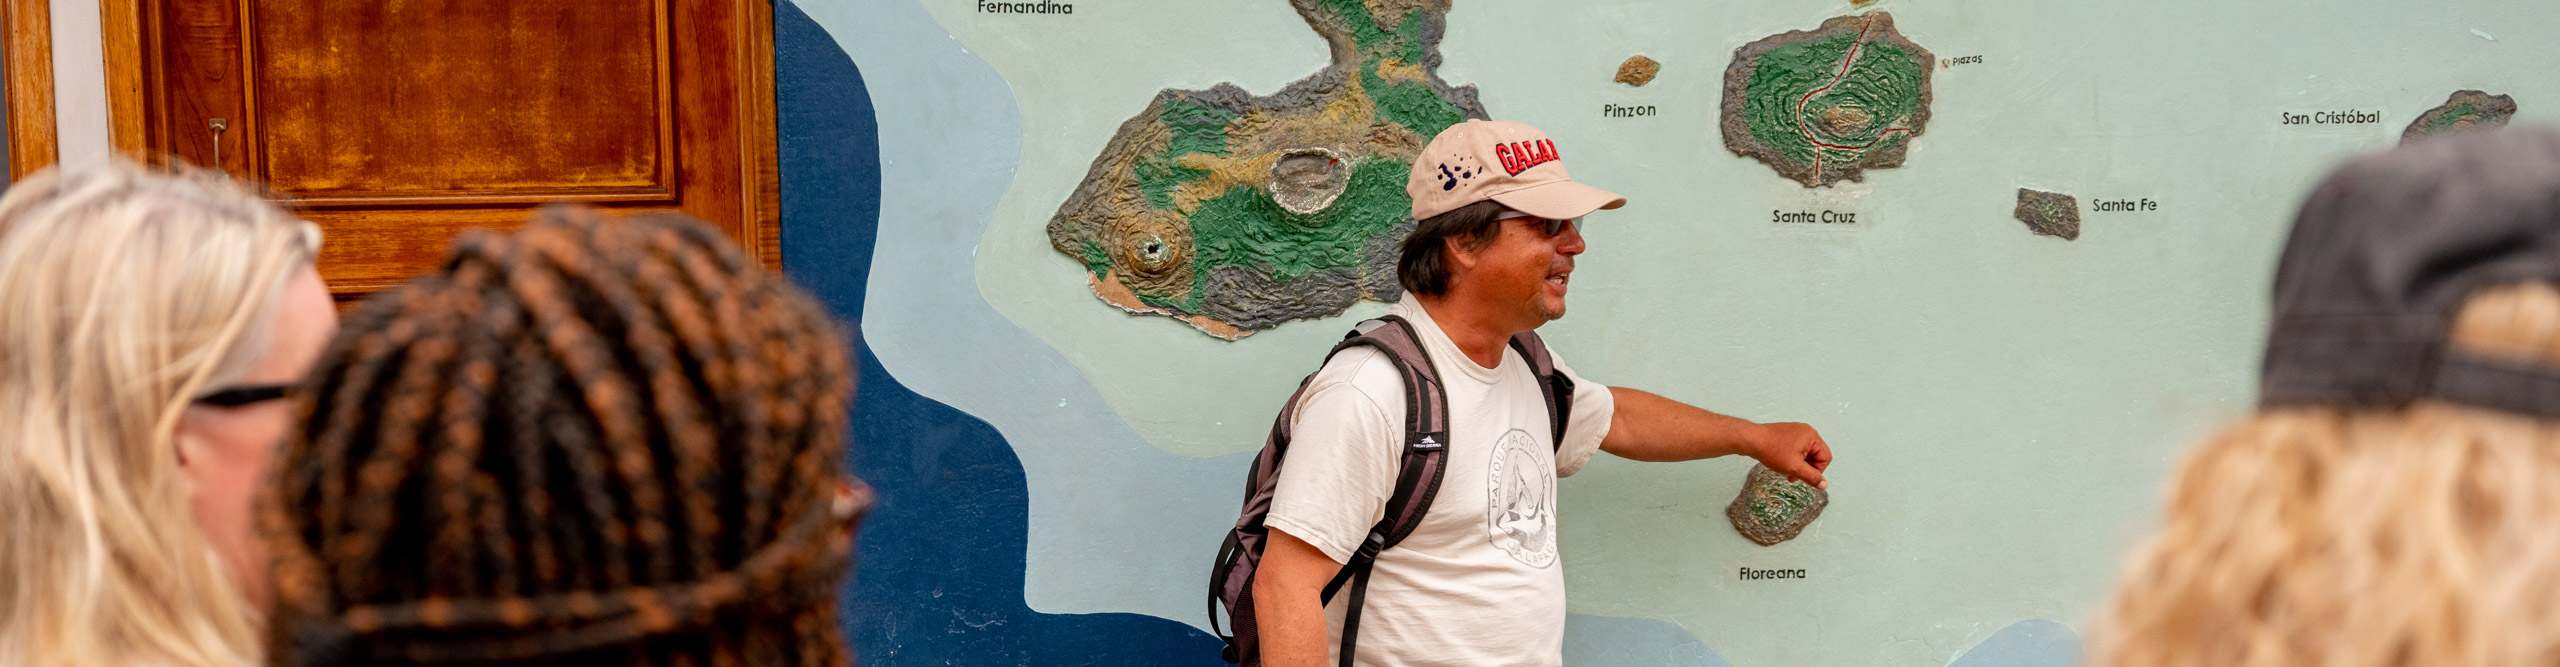 Guide talking in front of map of the Galapagos Islands, Ecuador